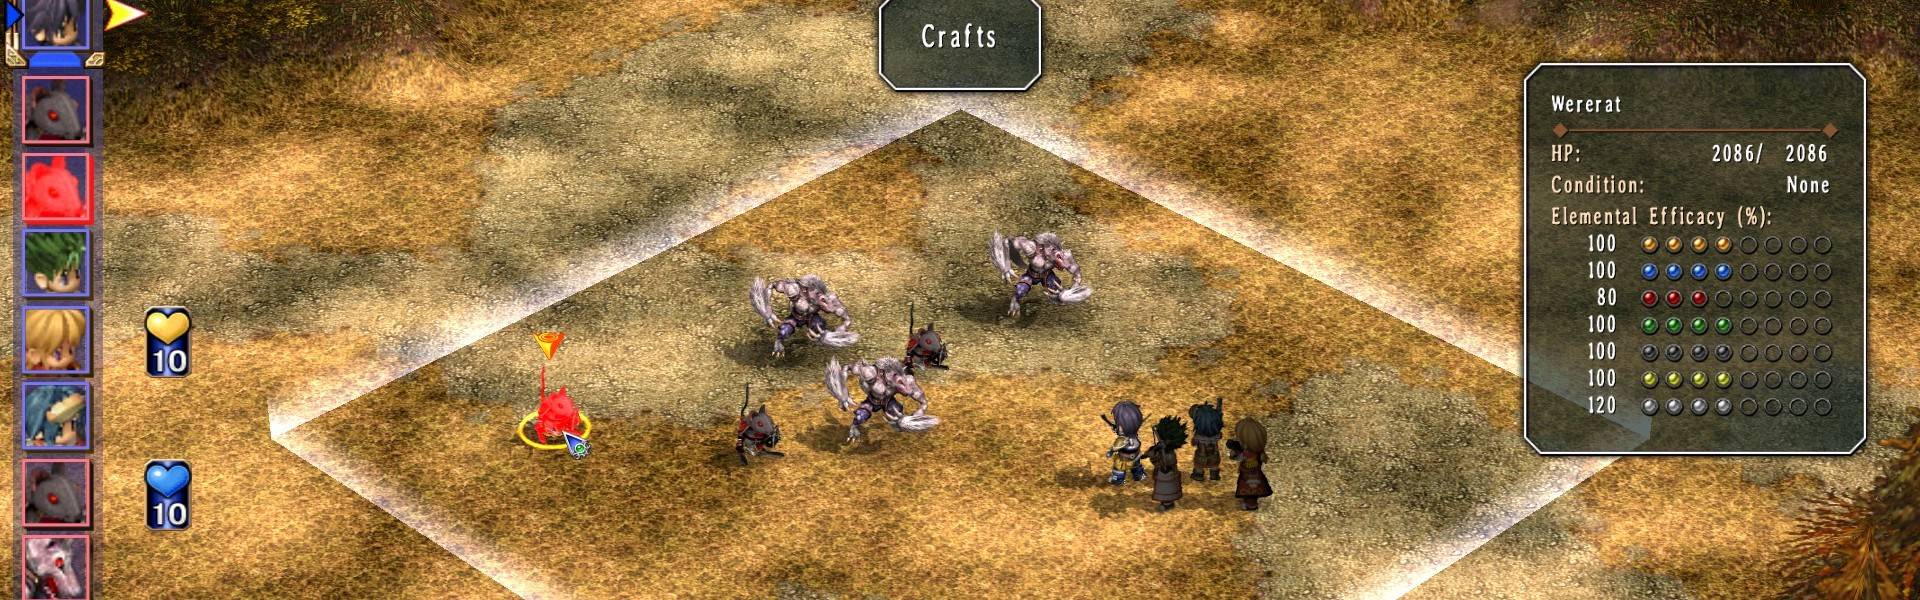 download The Legend of Heroes: Trails in the Sky the 3rd